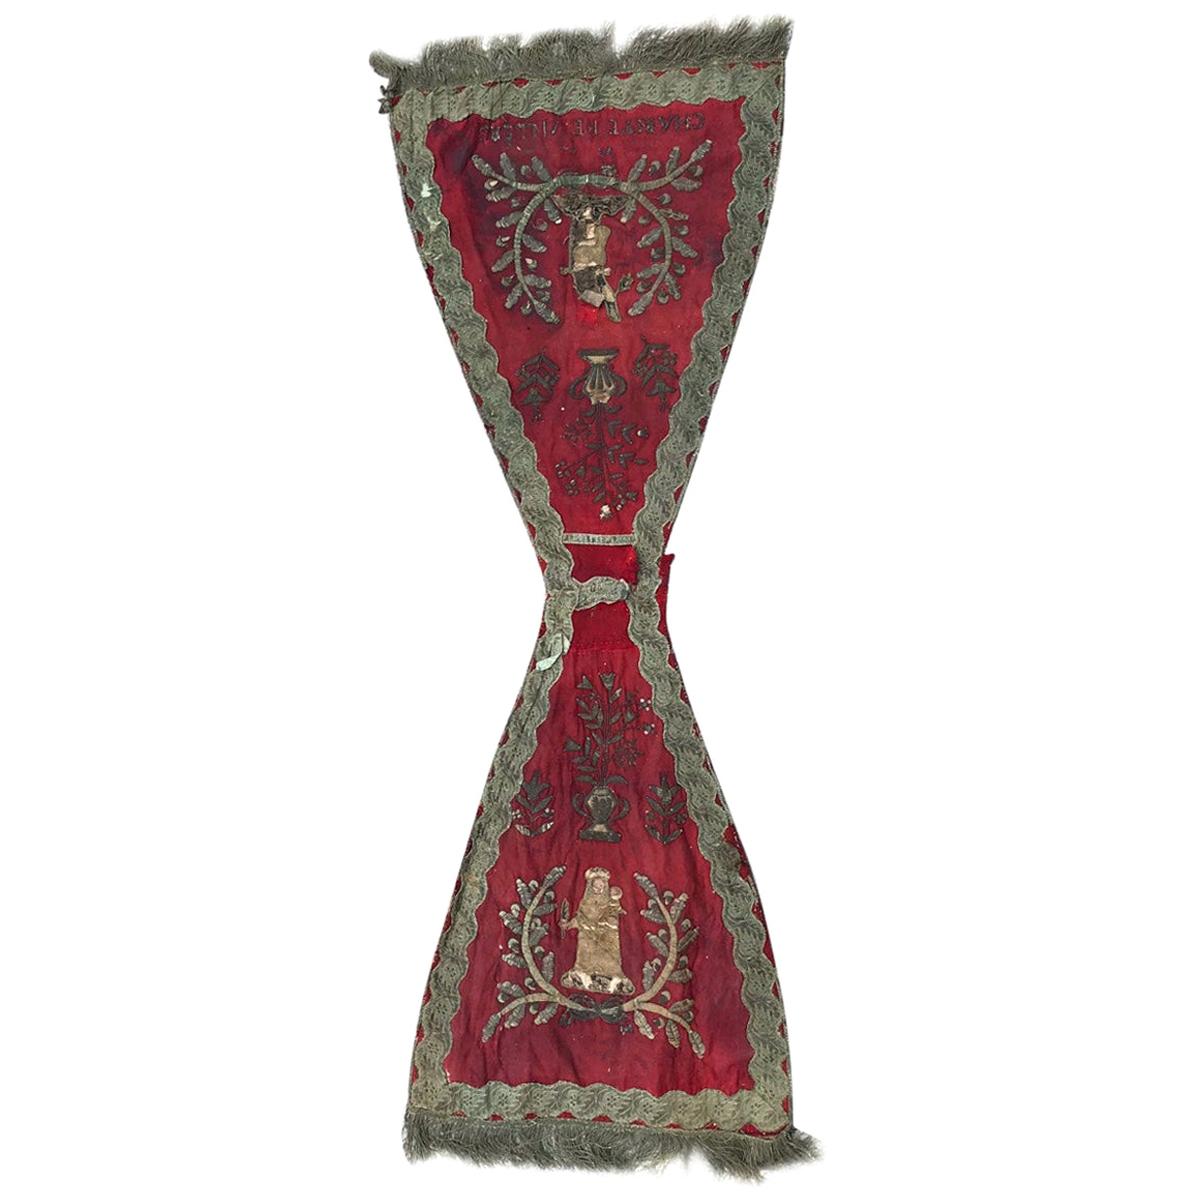 Bobyrug’s Antique Religious Embroidery For Sale